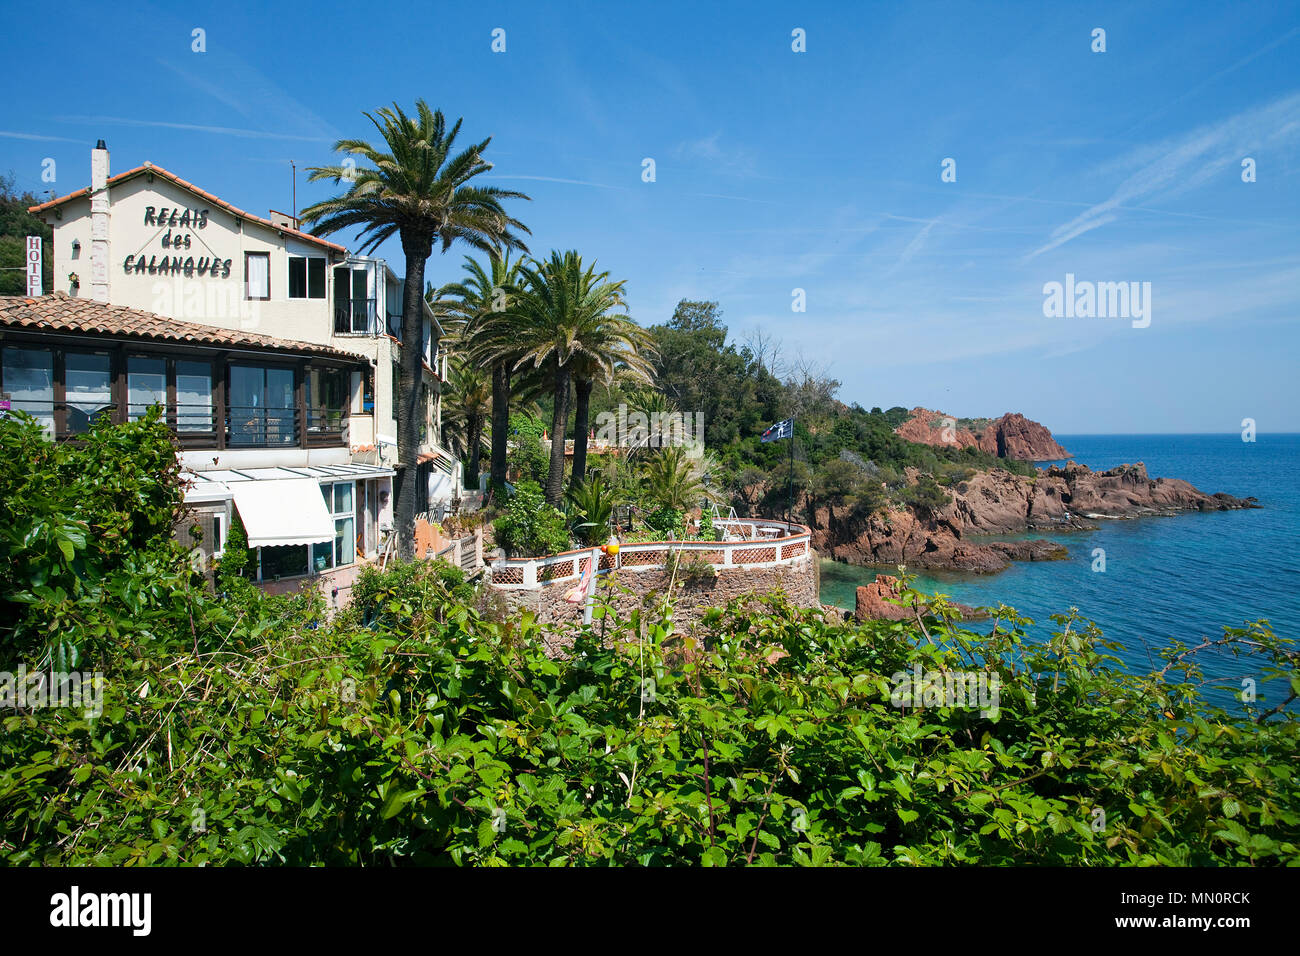 Small hotel at the rocky coast of Le Trayas, Esterel region, Departements Var, Alpes-Maritimes, South France, France, Europe Stock Photo